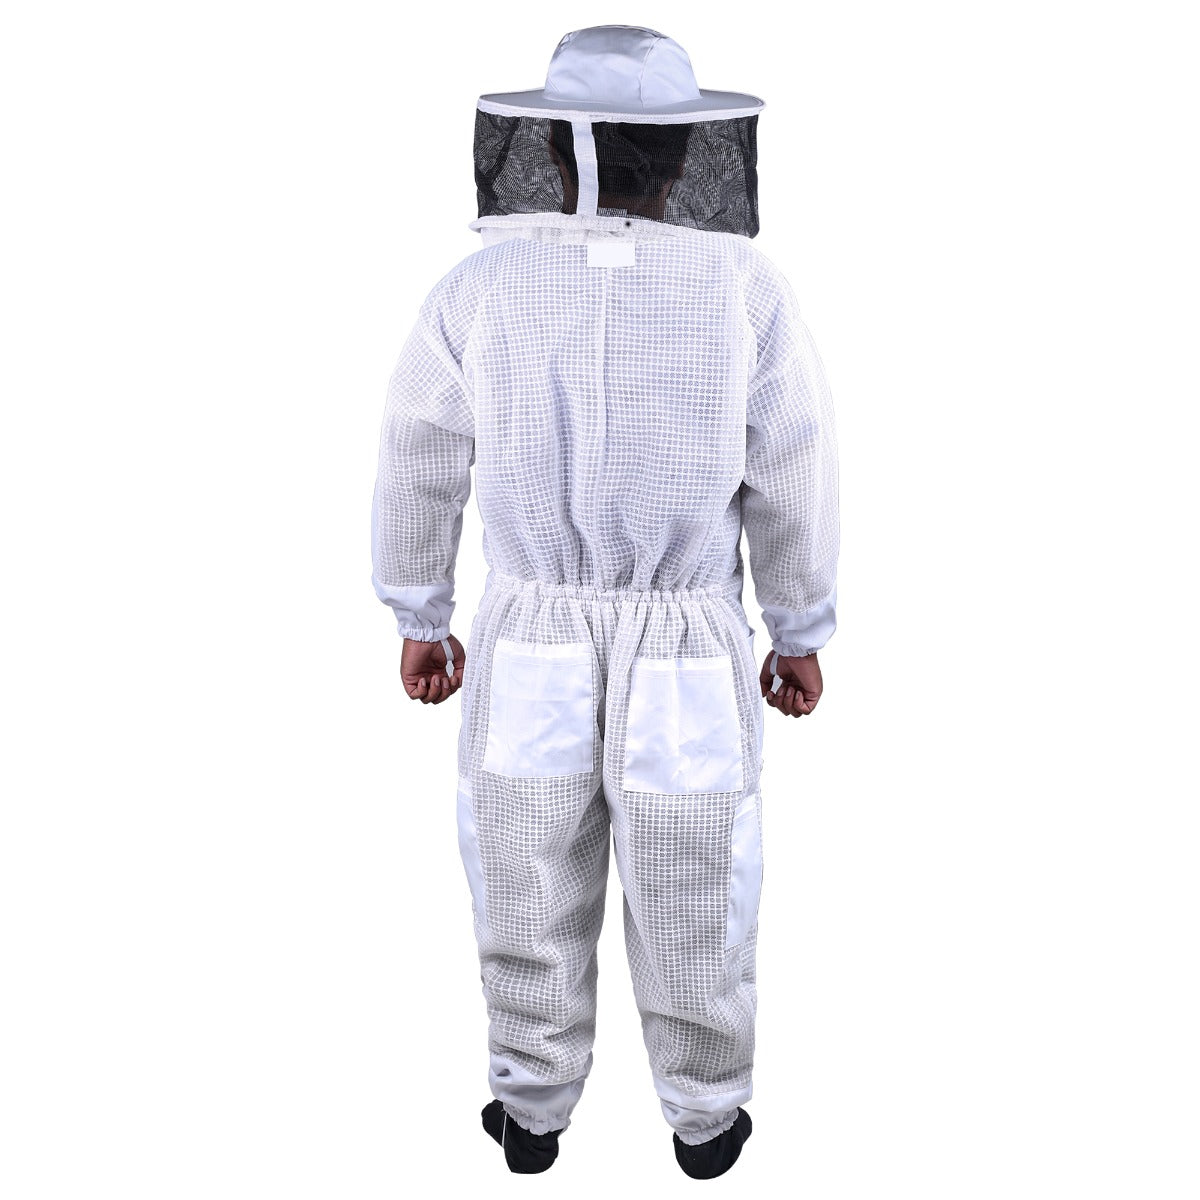 Beekeeping Bee Full Suit 3 Layer Mesh Ultra Cool Ventilated Round Head Beekeeping Protective Gear SIZE 2XL